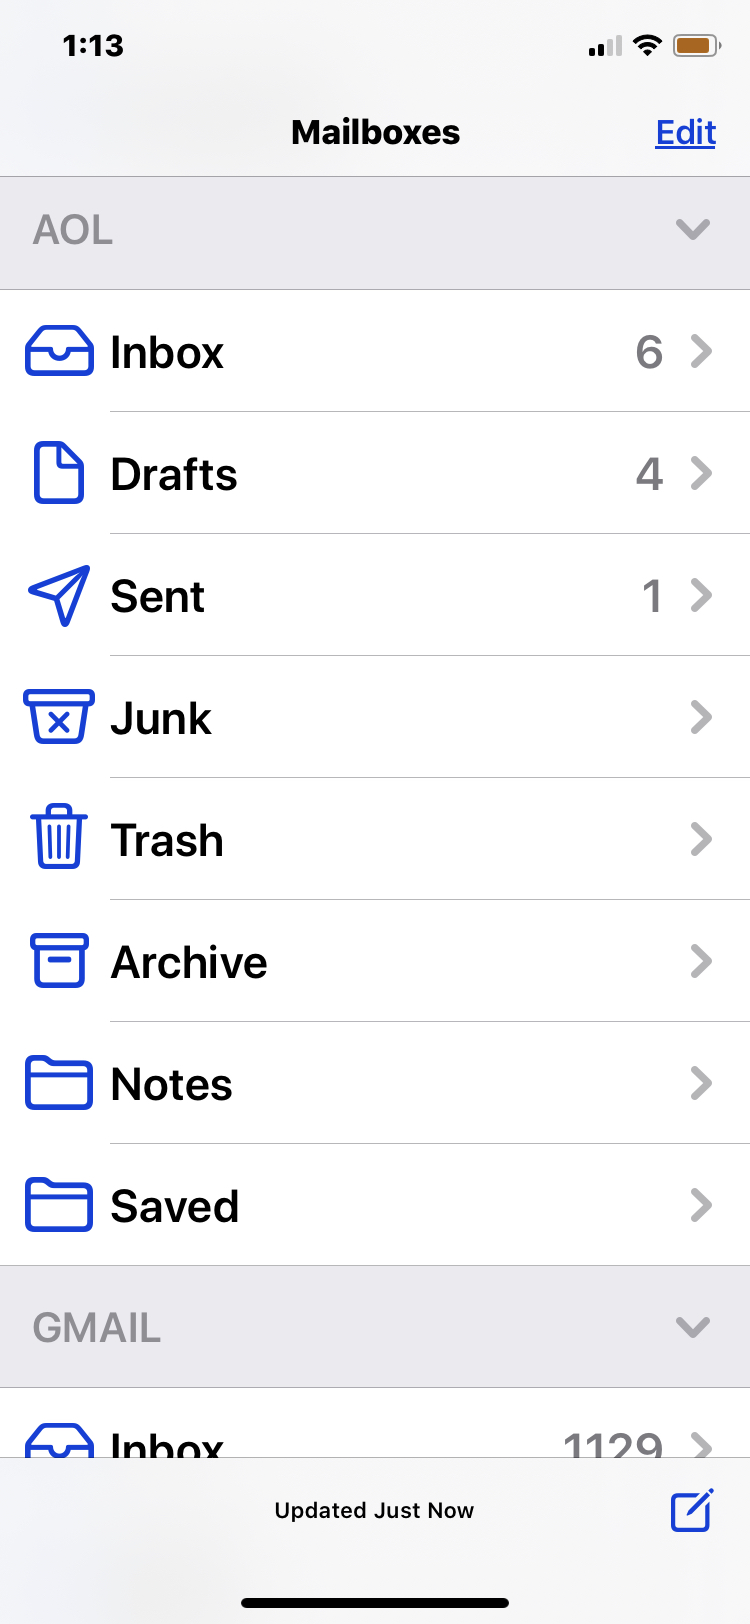 AOL Inboxes on iPhone and iPad Mail app